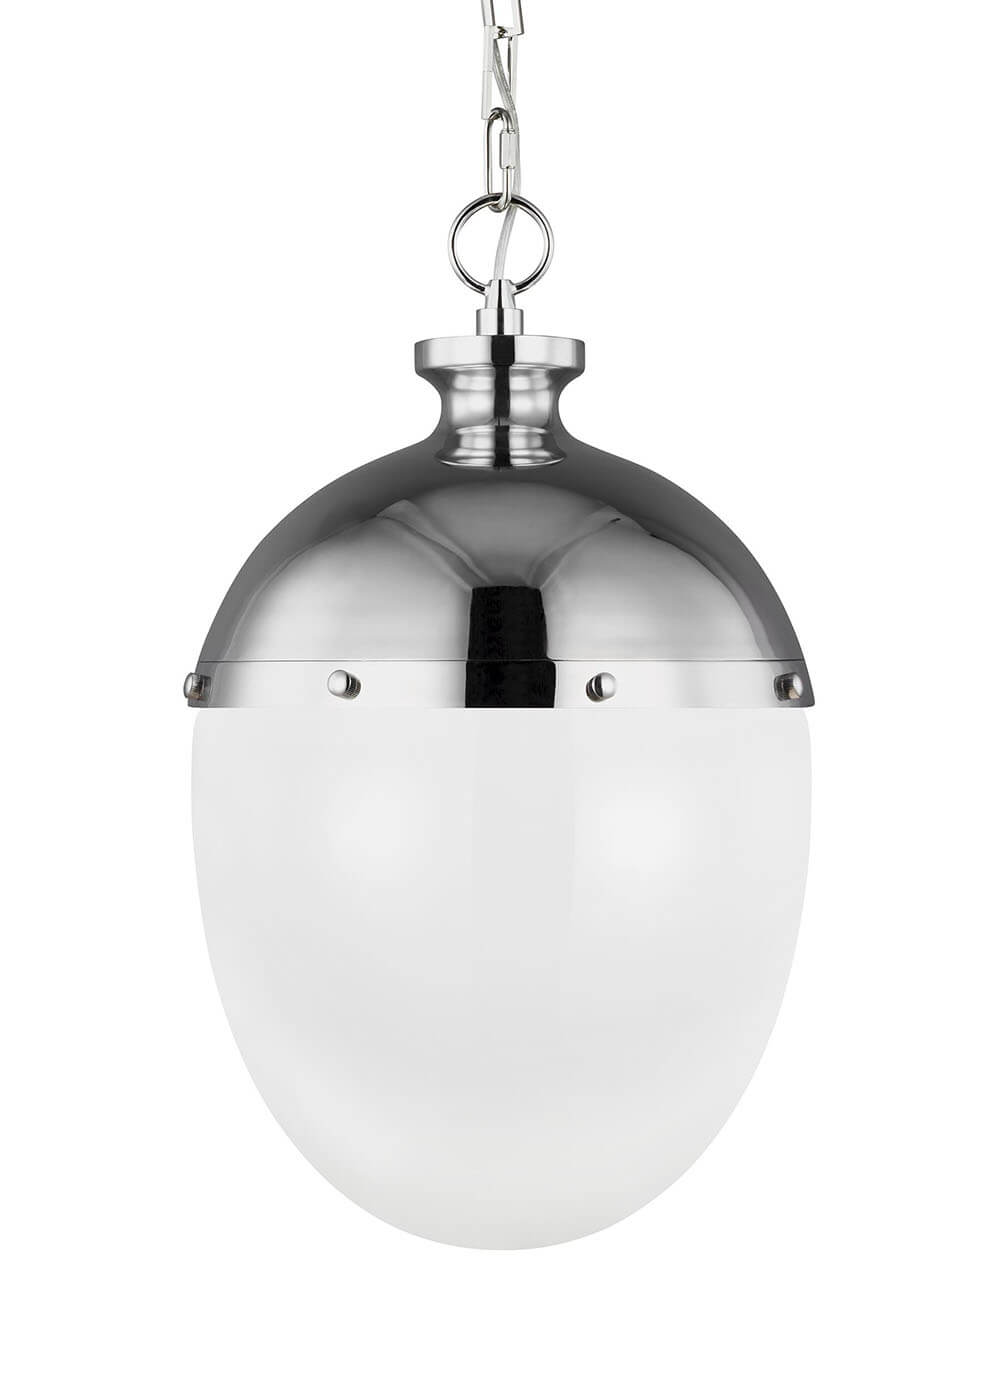 Oblong glass dining room pendant with a polished nickel finish.